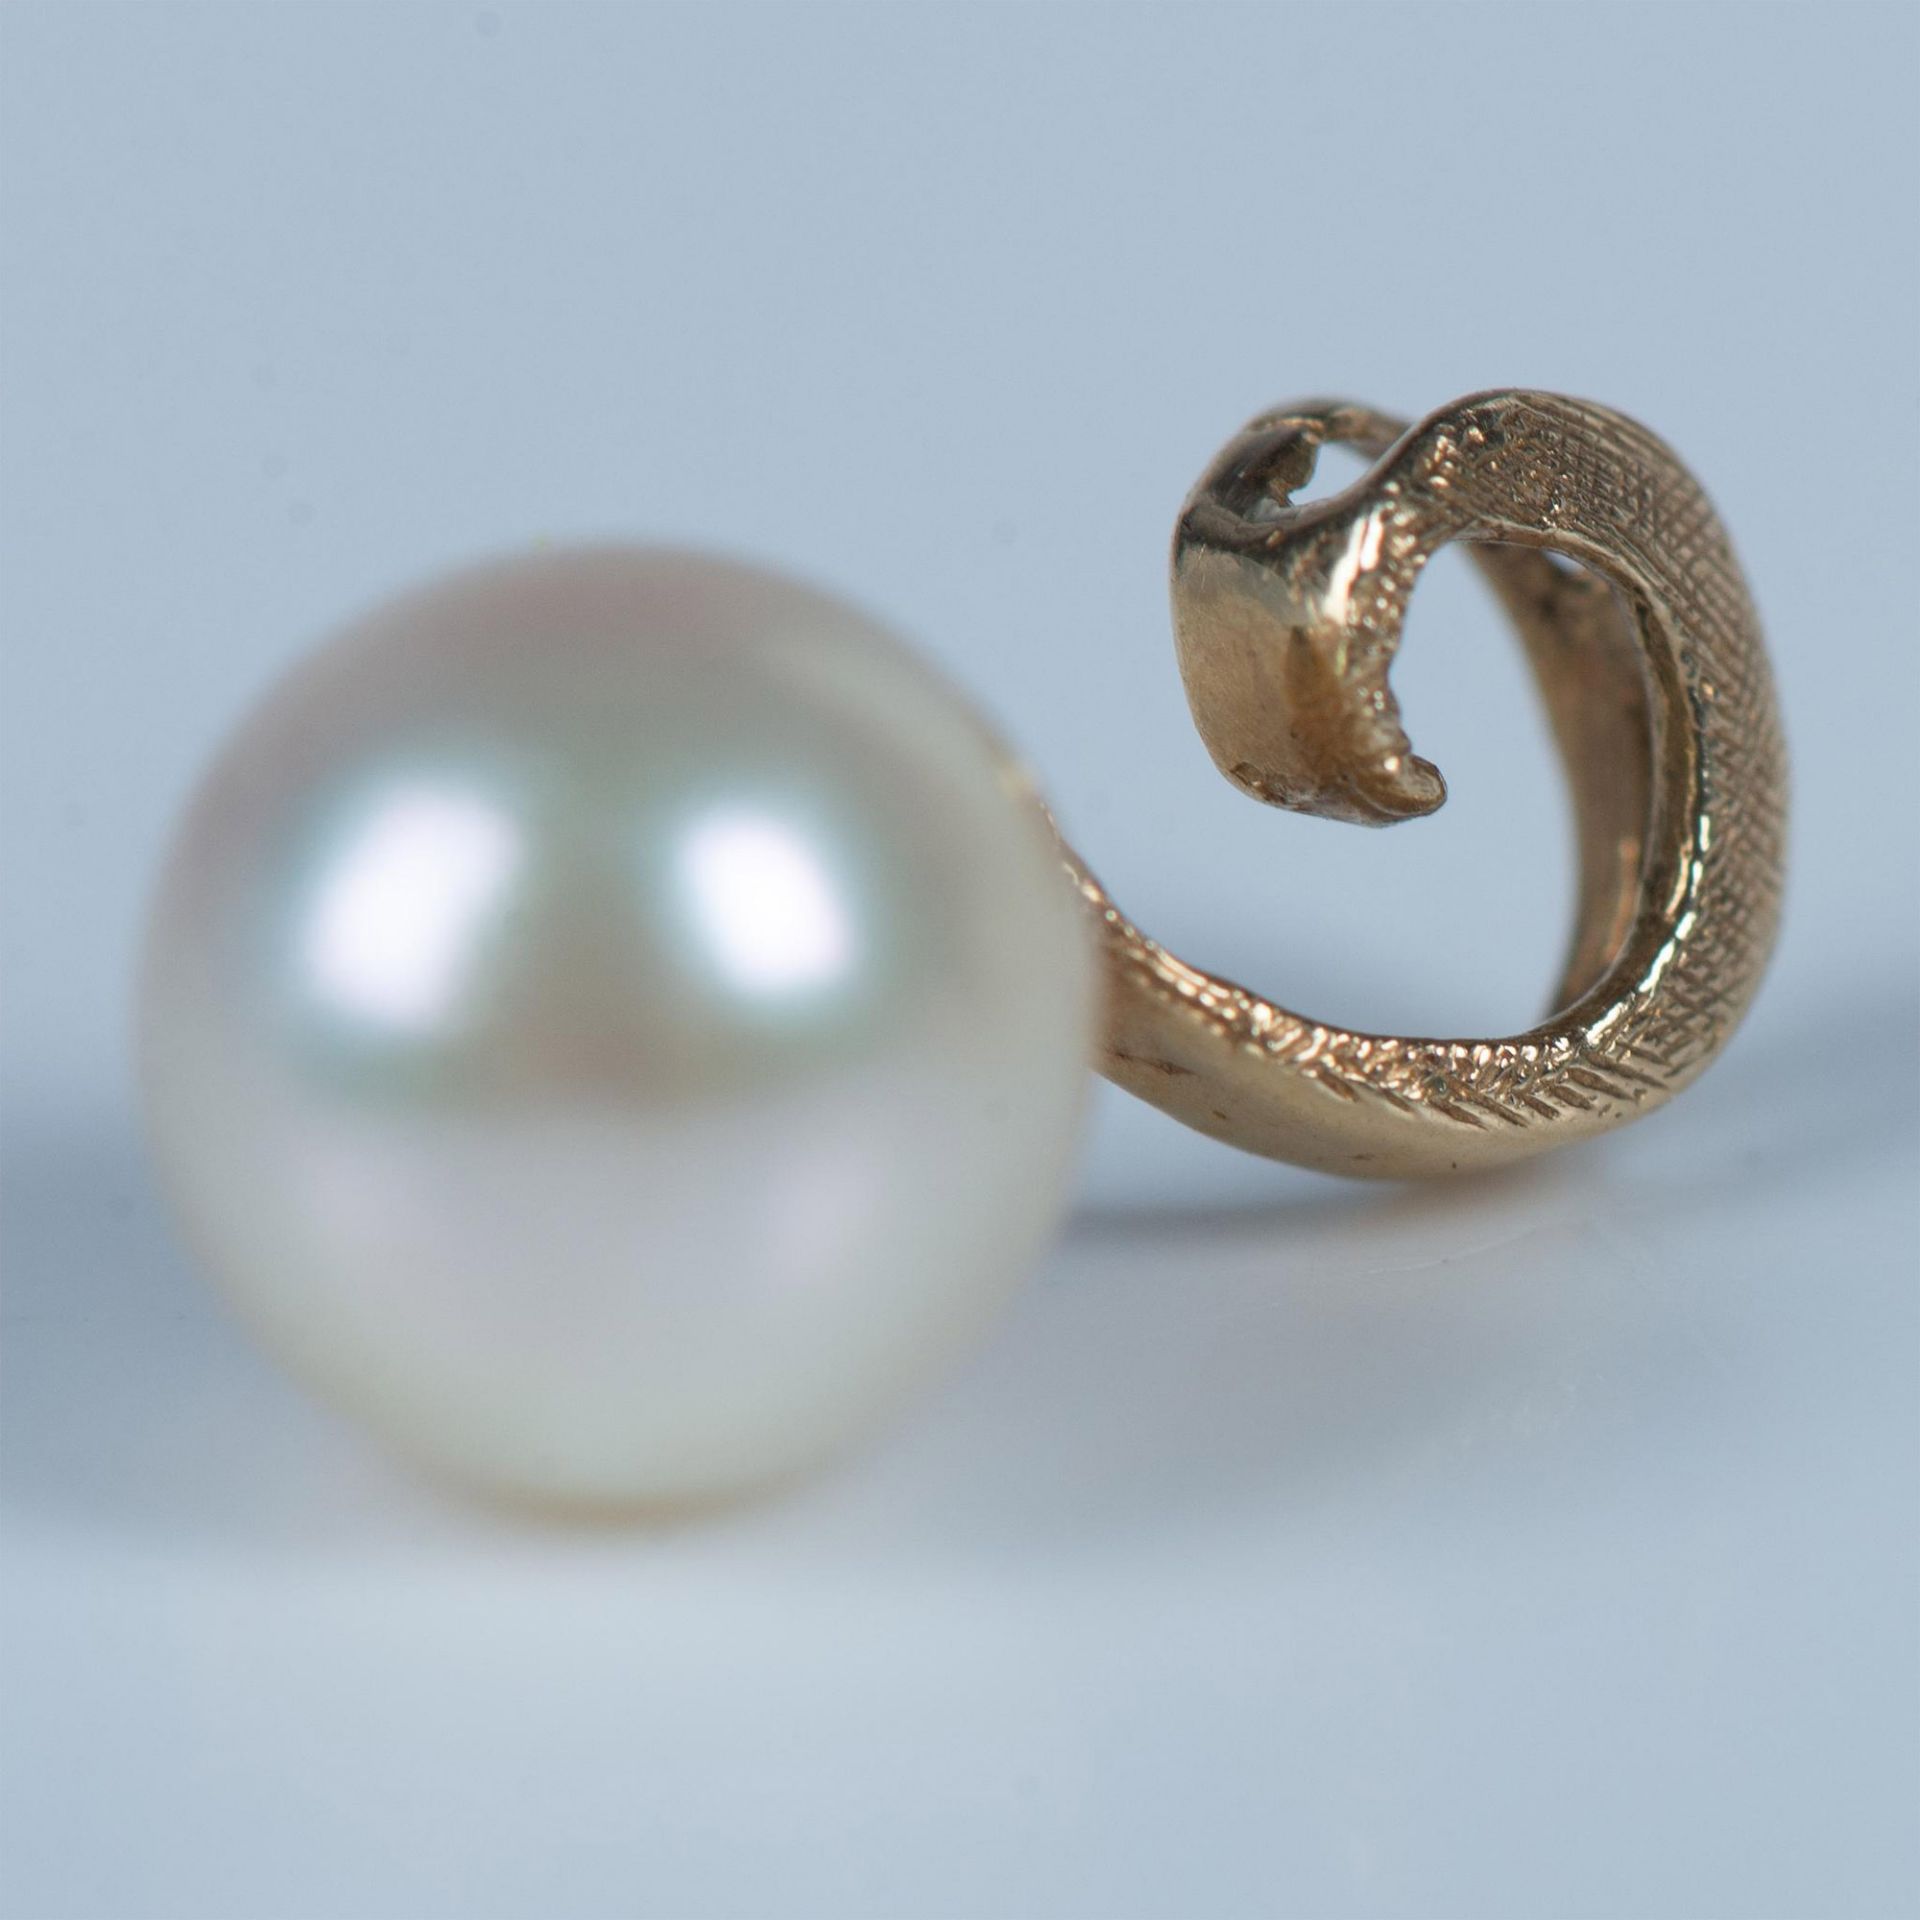 Petite 14K Gold and Pearl Pendant - Image 4 of 5